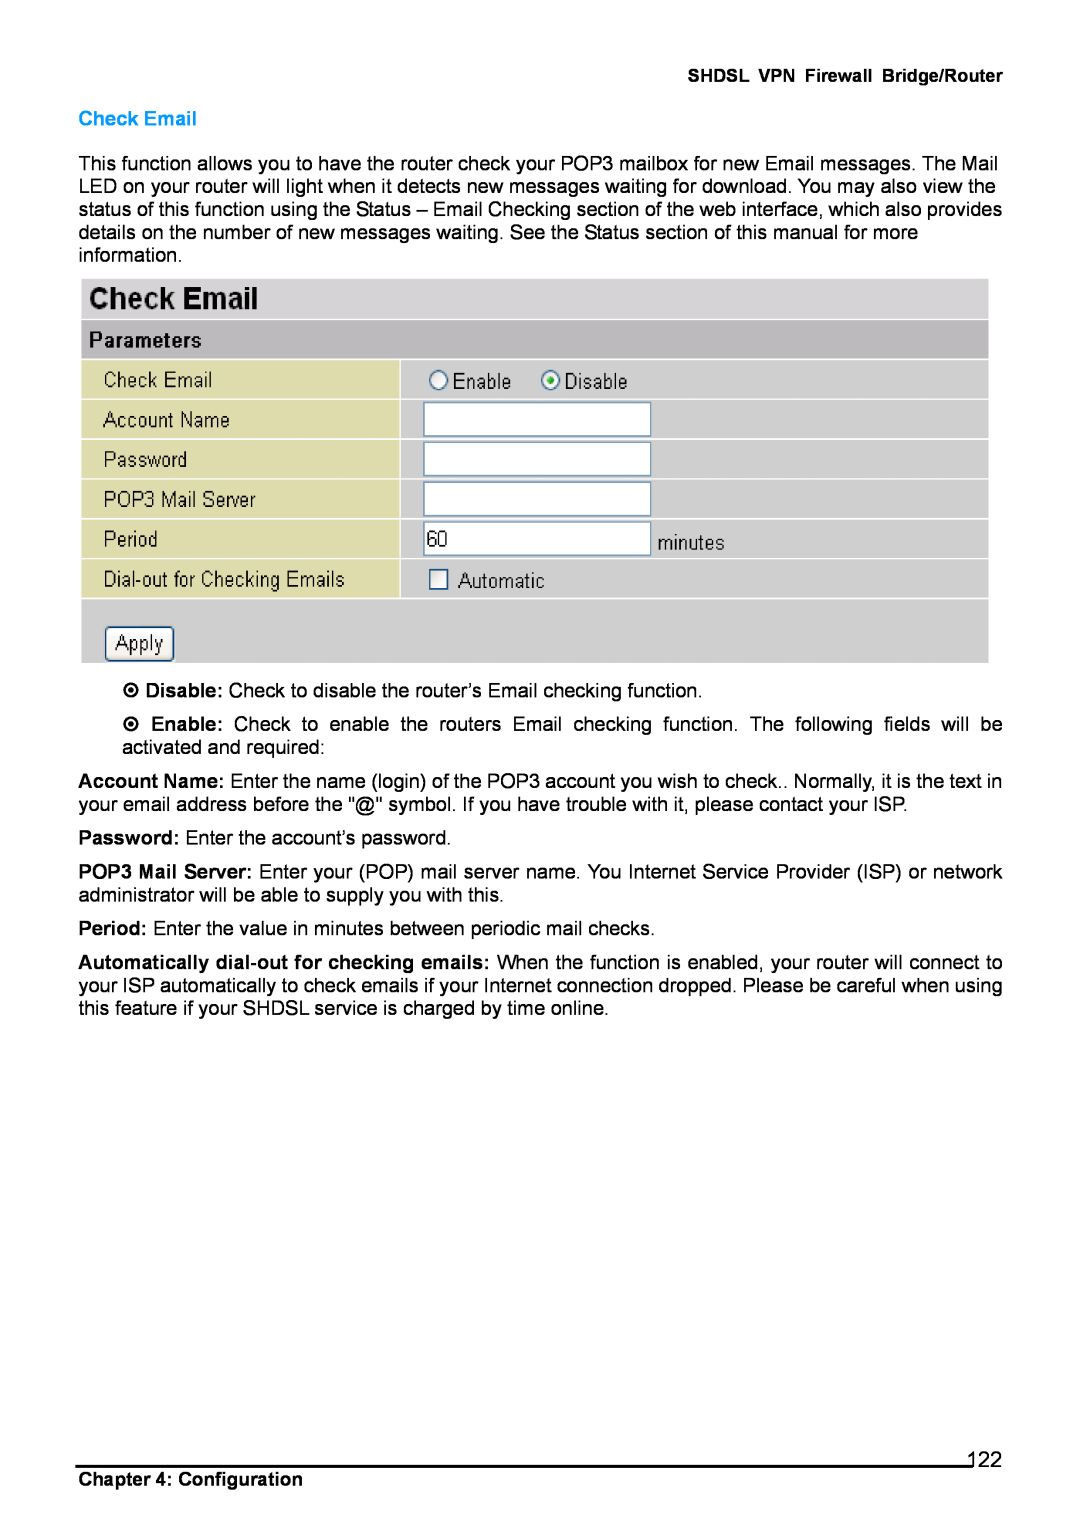 Billion Electric Company 8501 user manual Check Email 